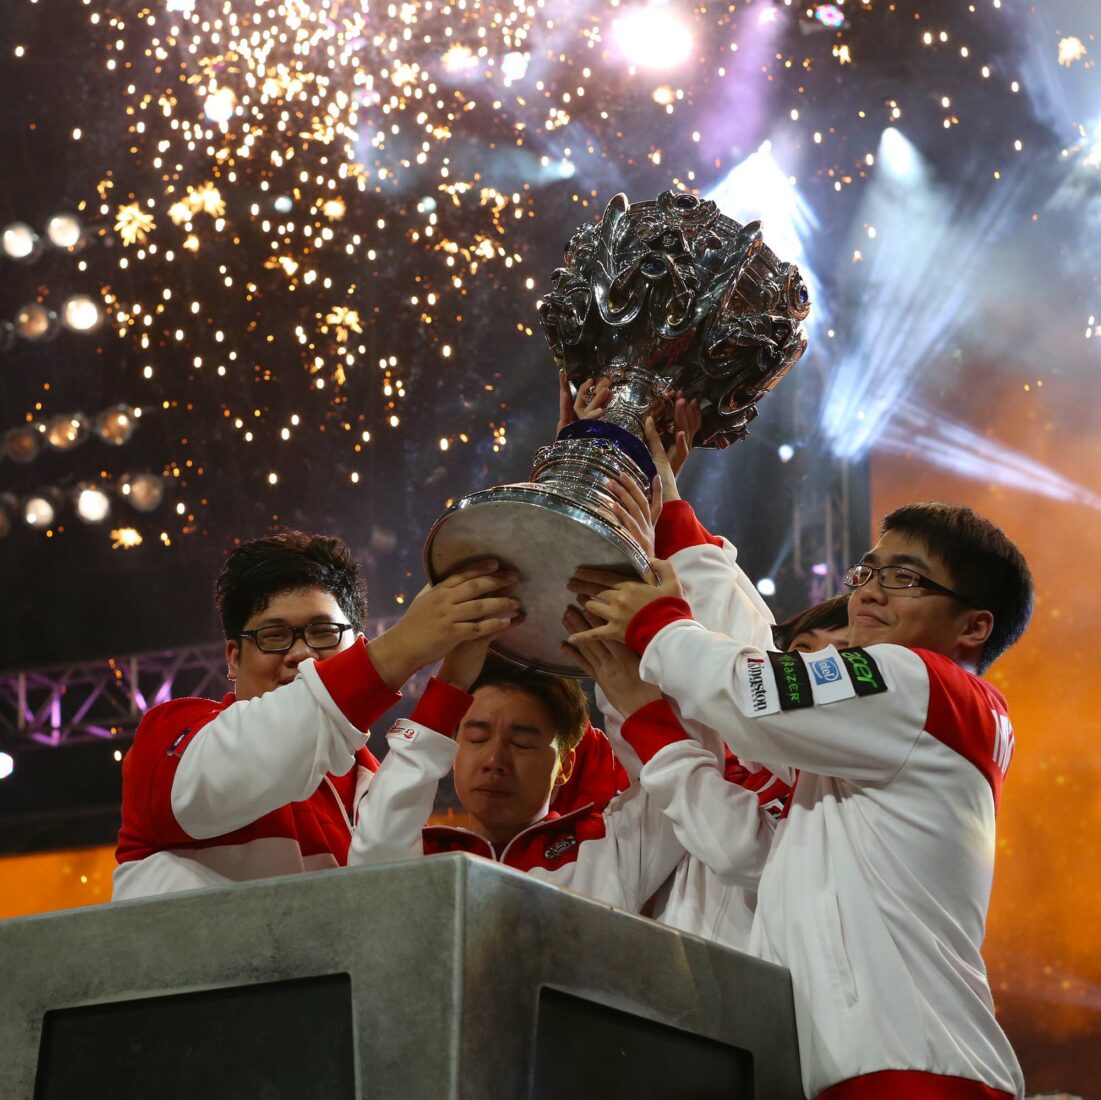 Worlds 2020] The Summoner's Cup will be presented in a Louis